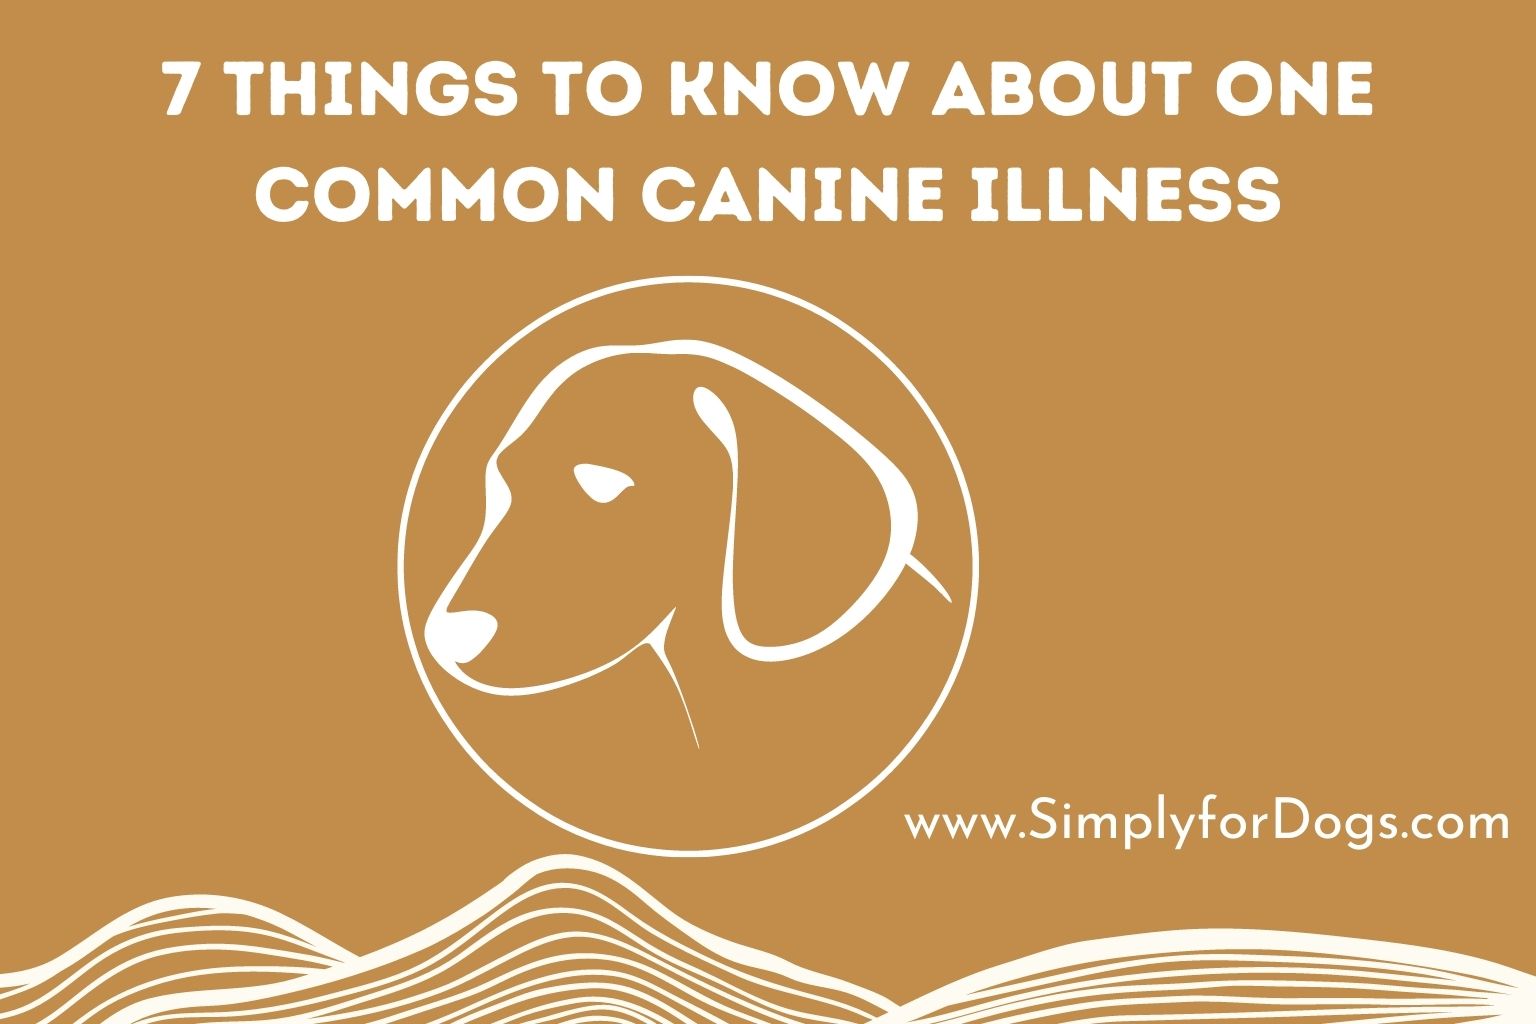 7 Things to Know About One Common Canine Illness